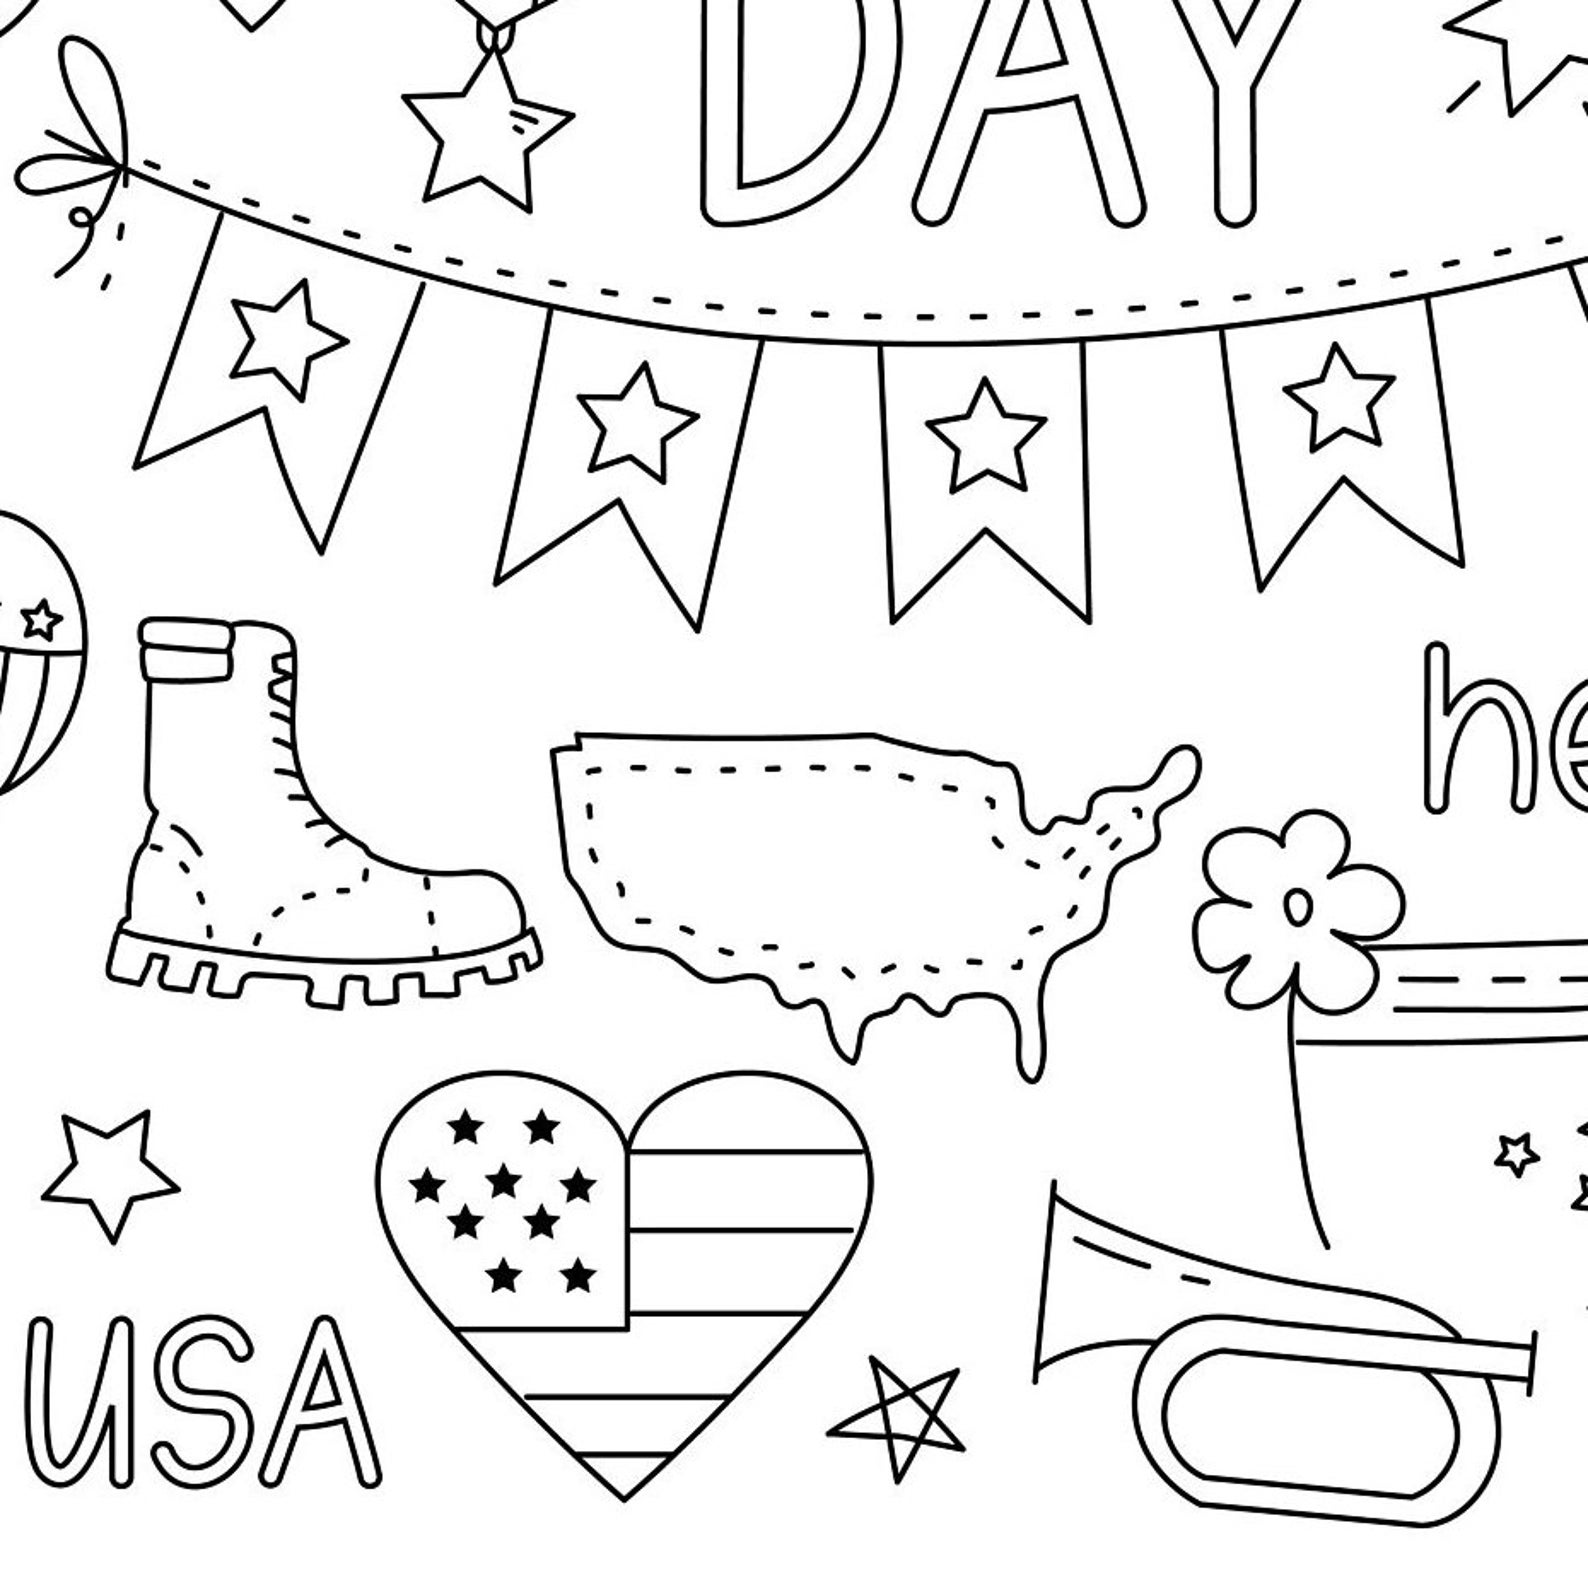 jumbo-veterans-day-coloring-page-coloring-page-banner-military